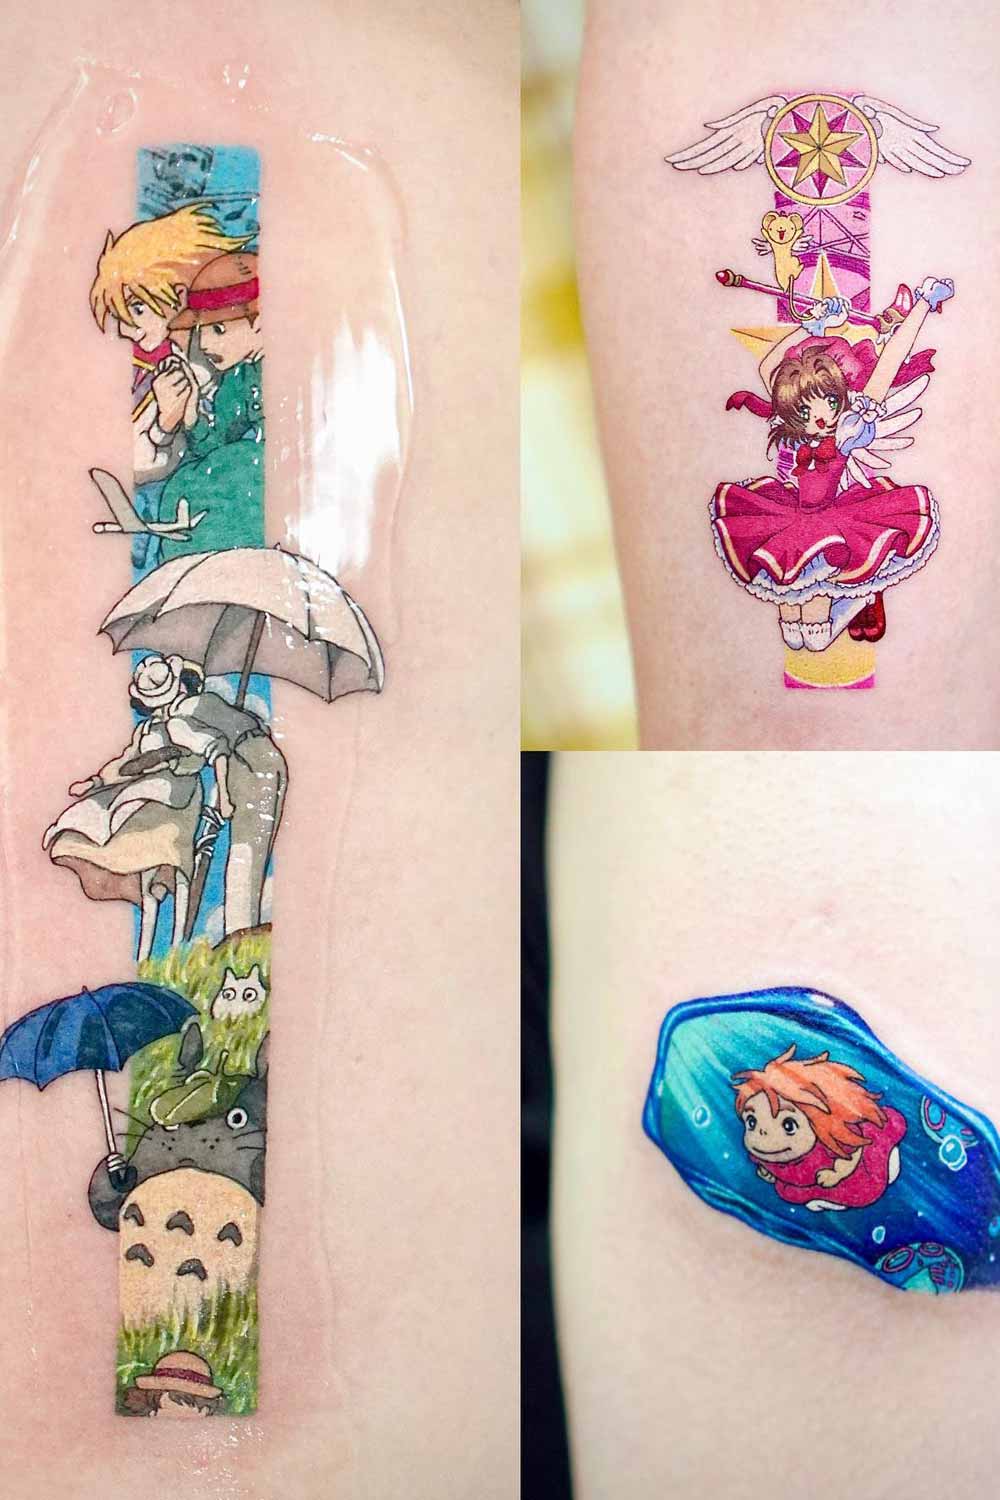 The Surging Trend: Anime Tattoos on the Rise